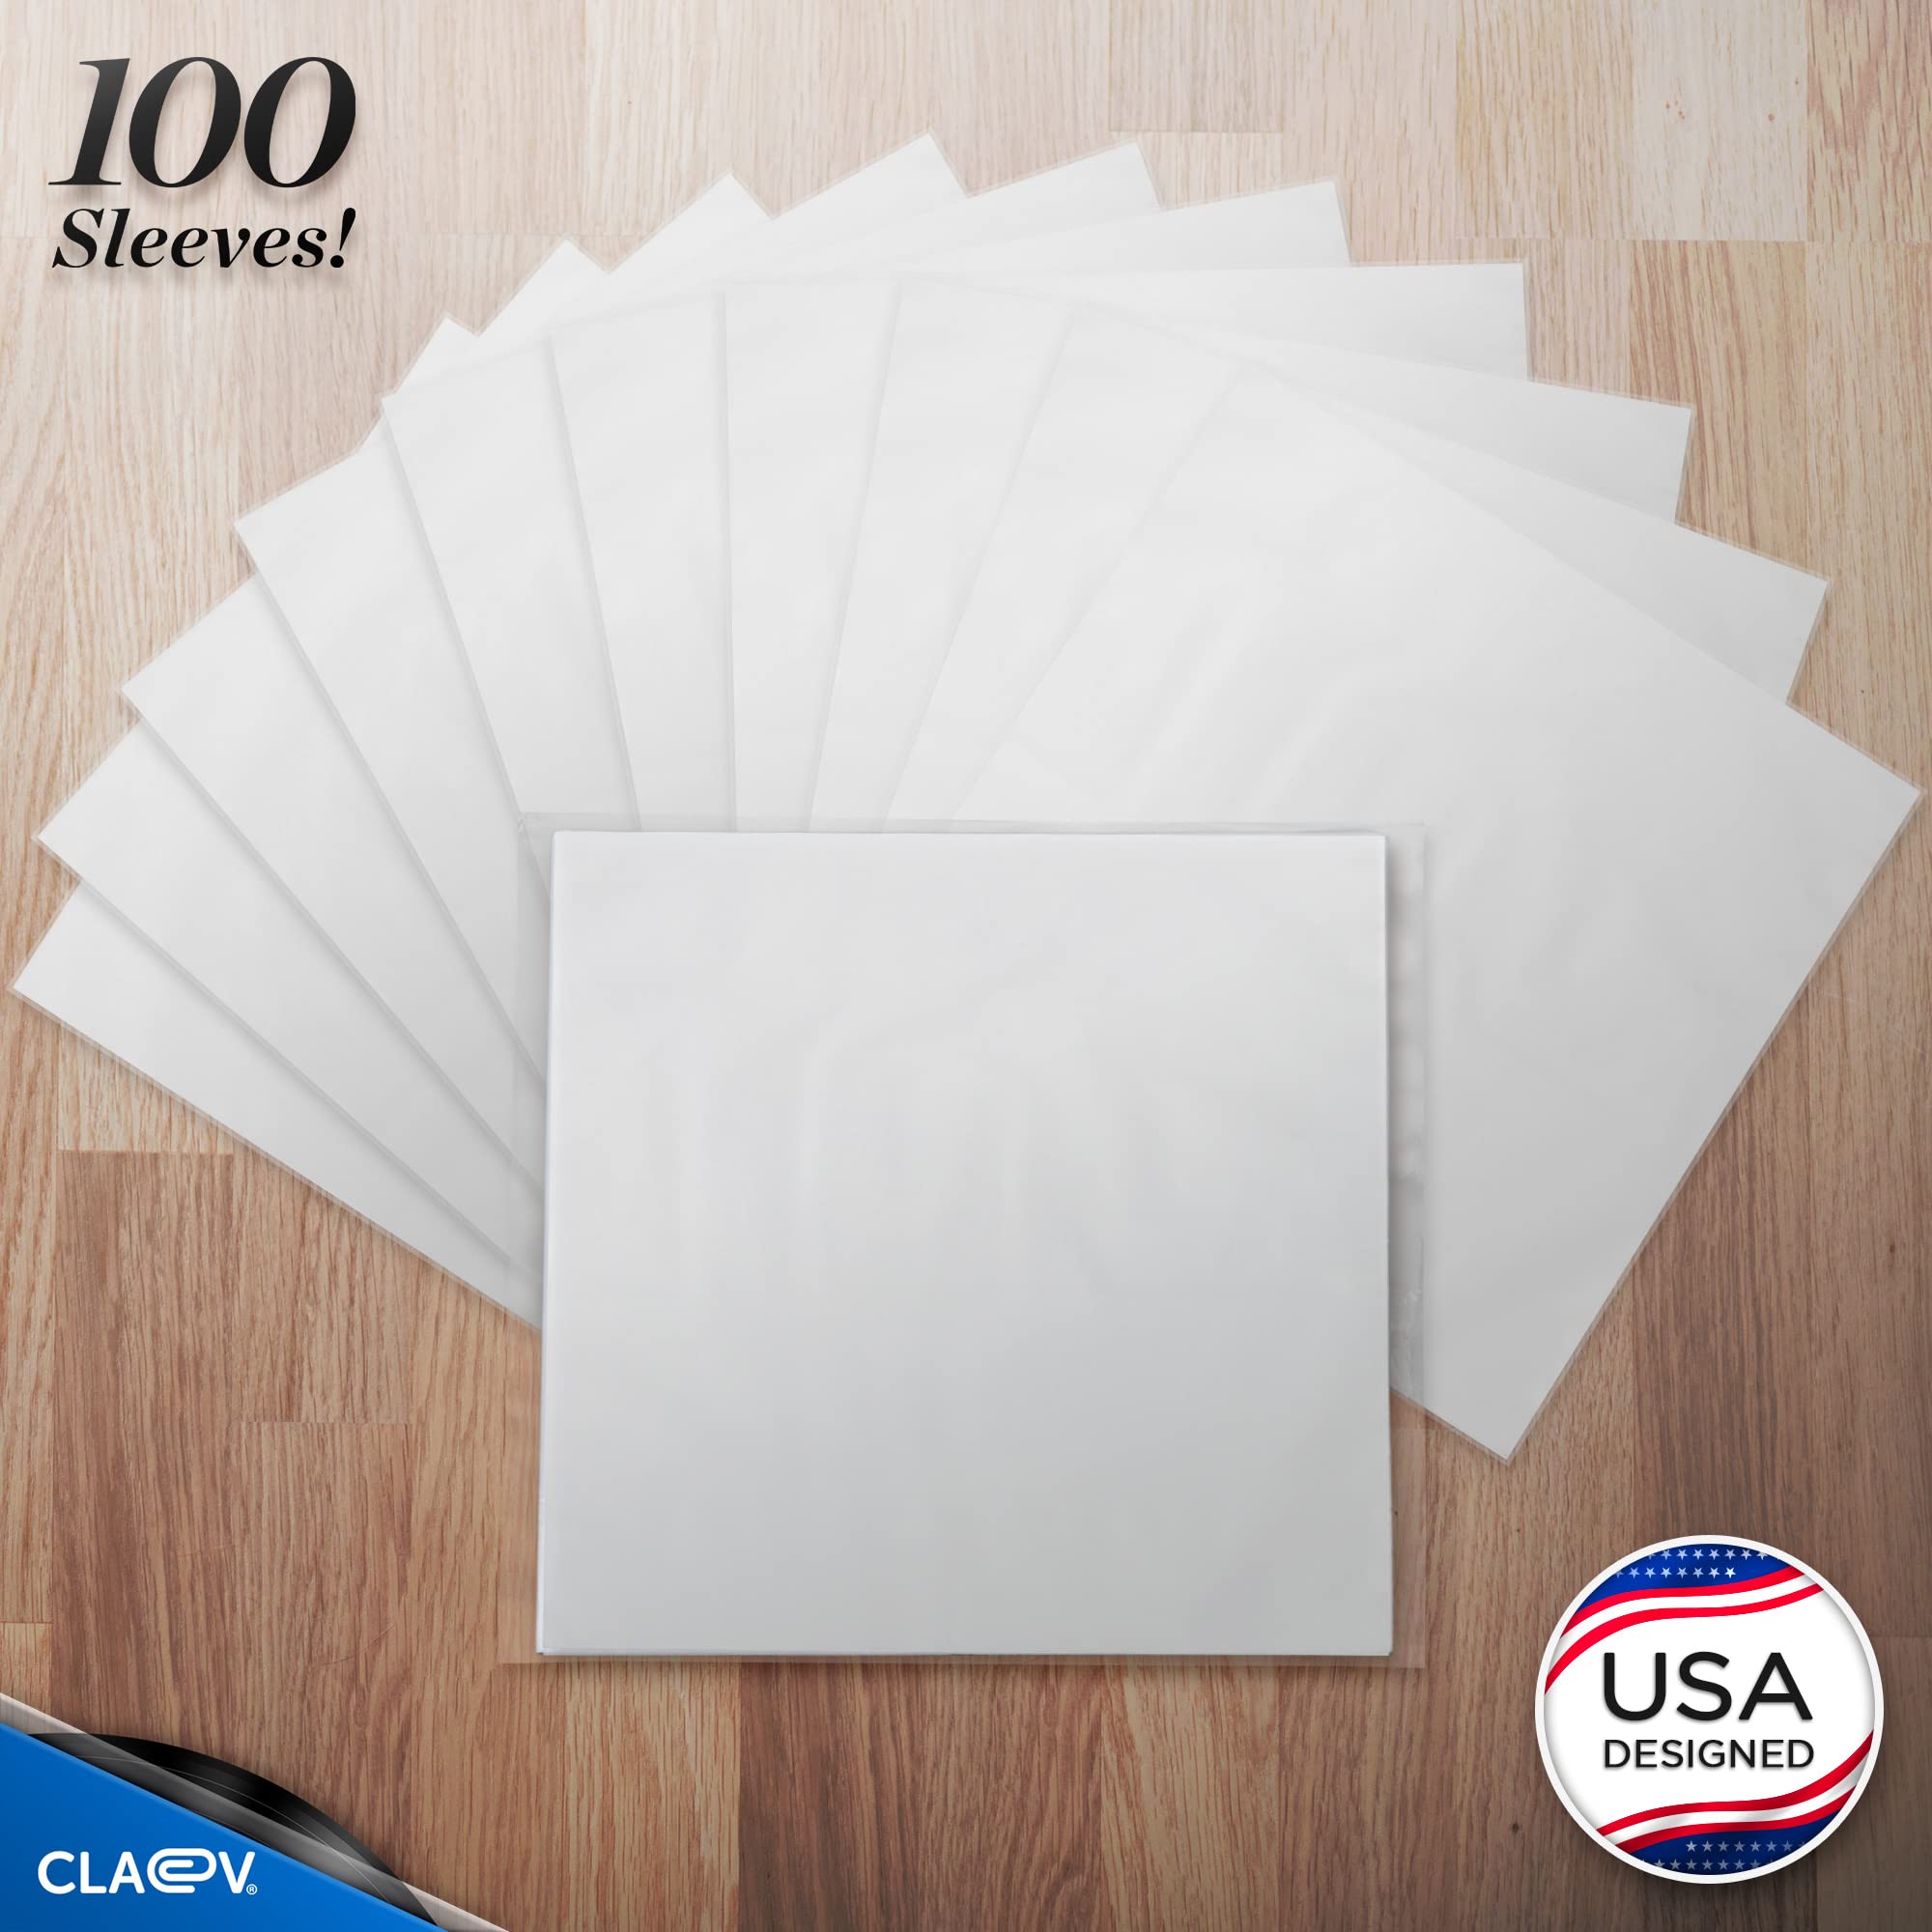 Claev 100 Anti Static Inner Record Sleeves w/Rice Paper for Vinyl LP Records (12 inch, Square), High Fidelity Protective Plastic Storage Covers